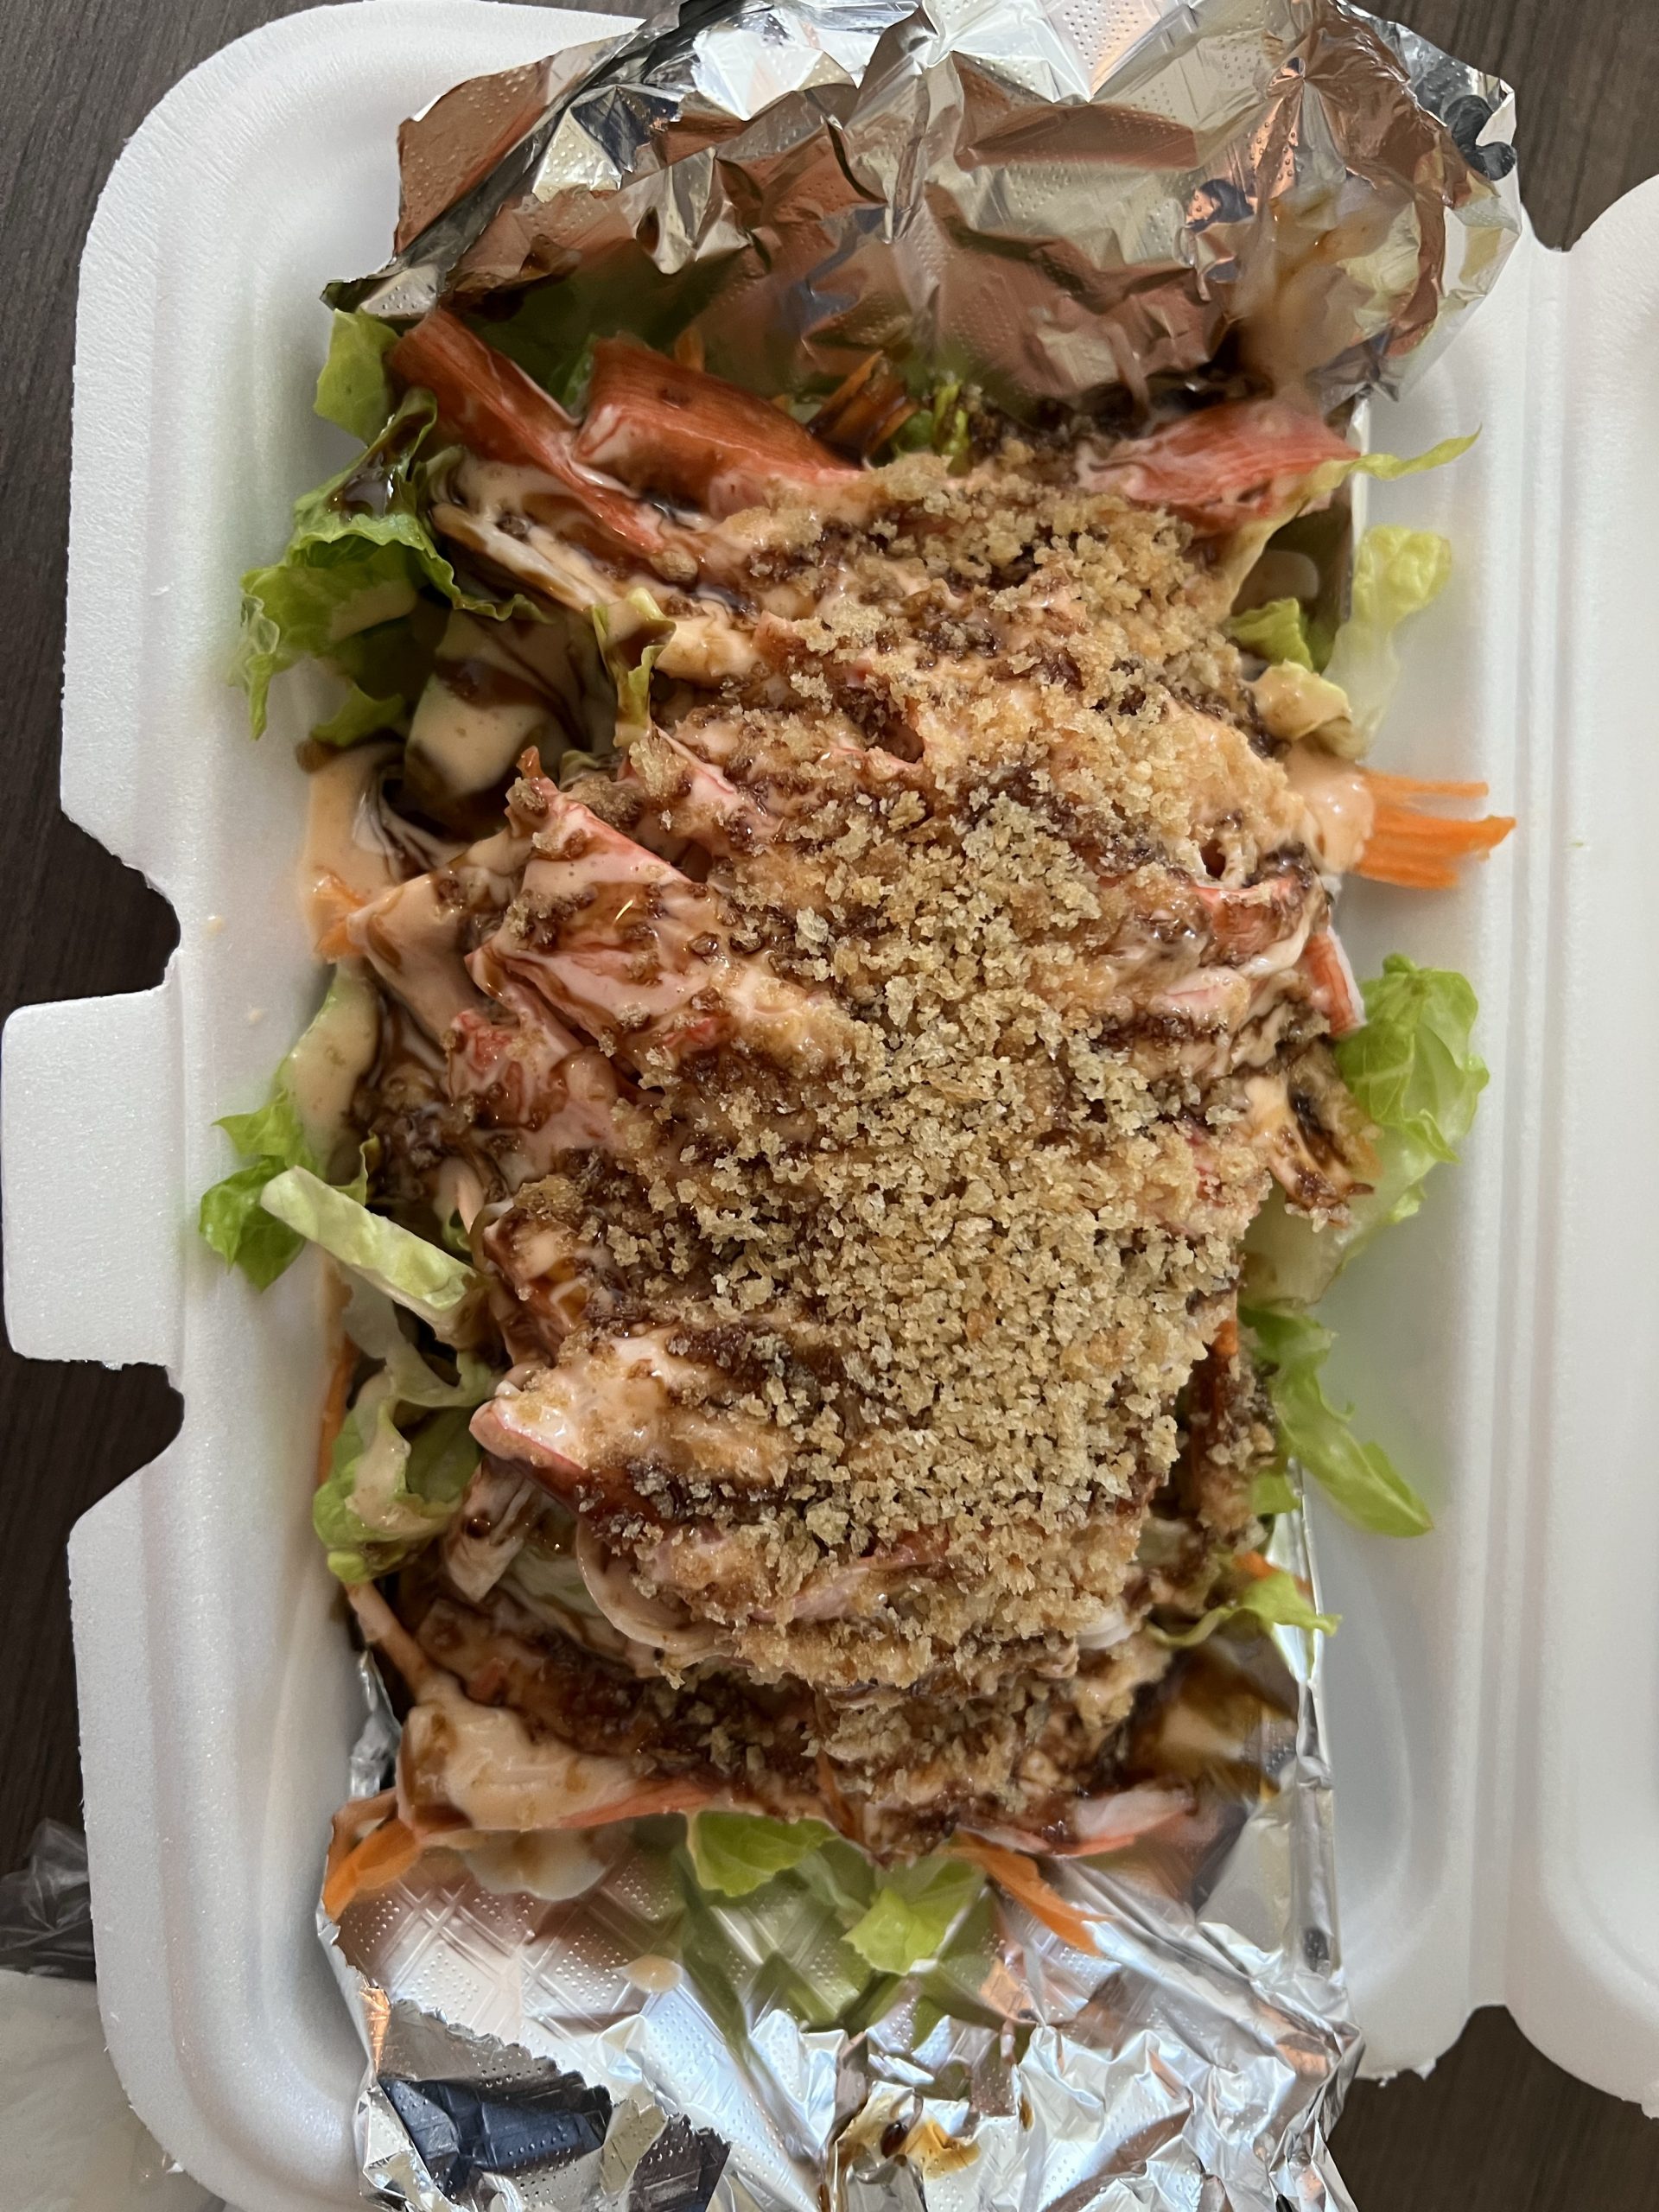 Crunchy Spicy Krab Salad from Bee's Boba in Safety Harbor